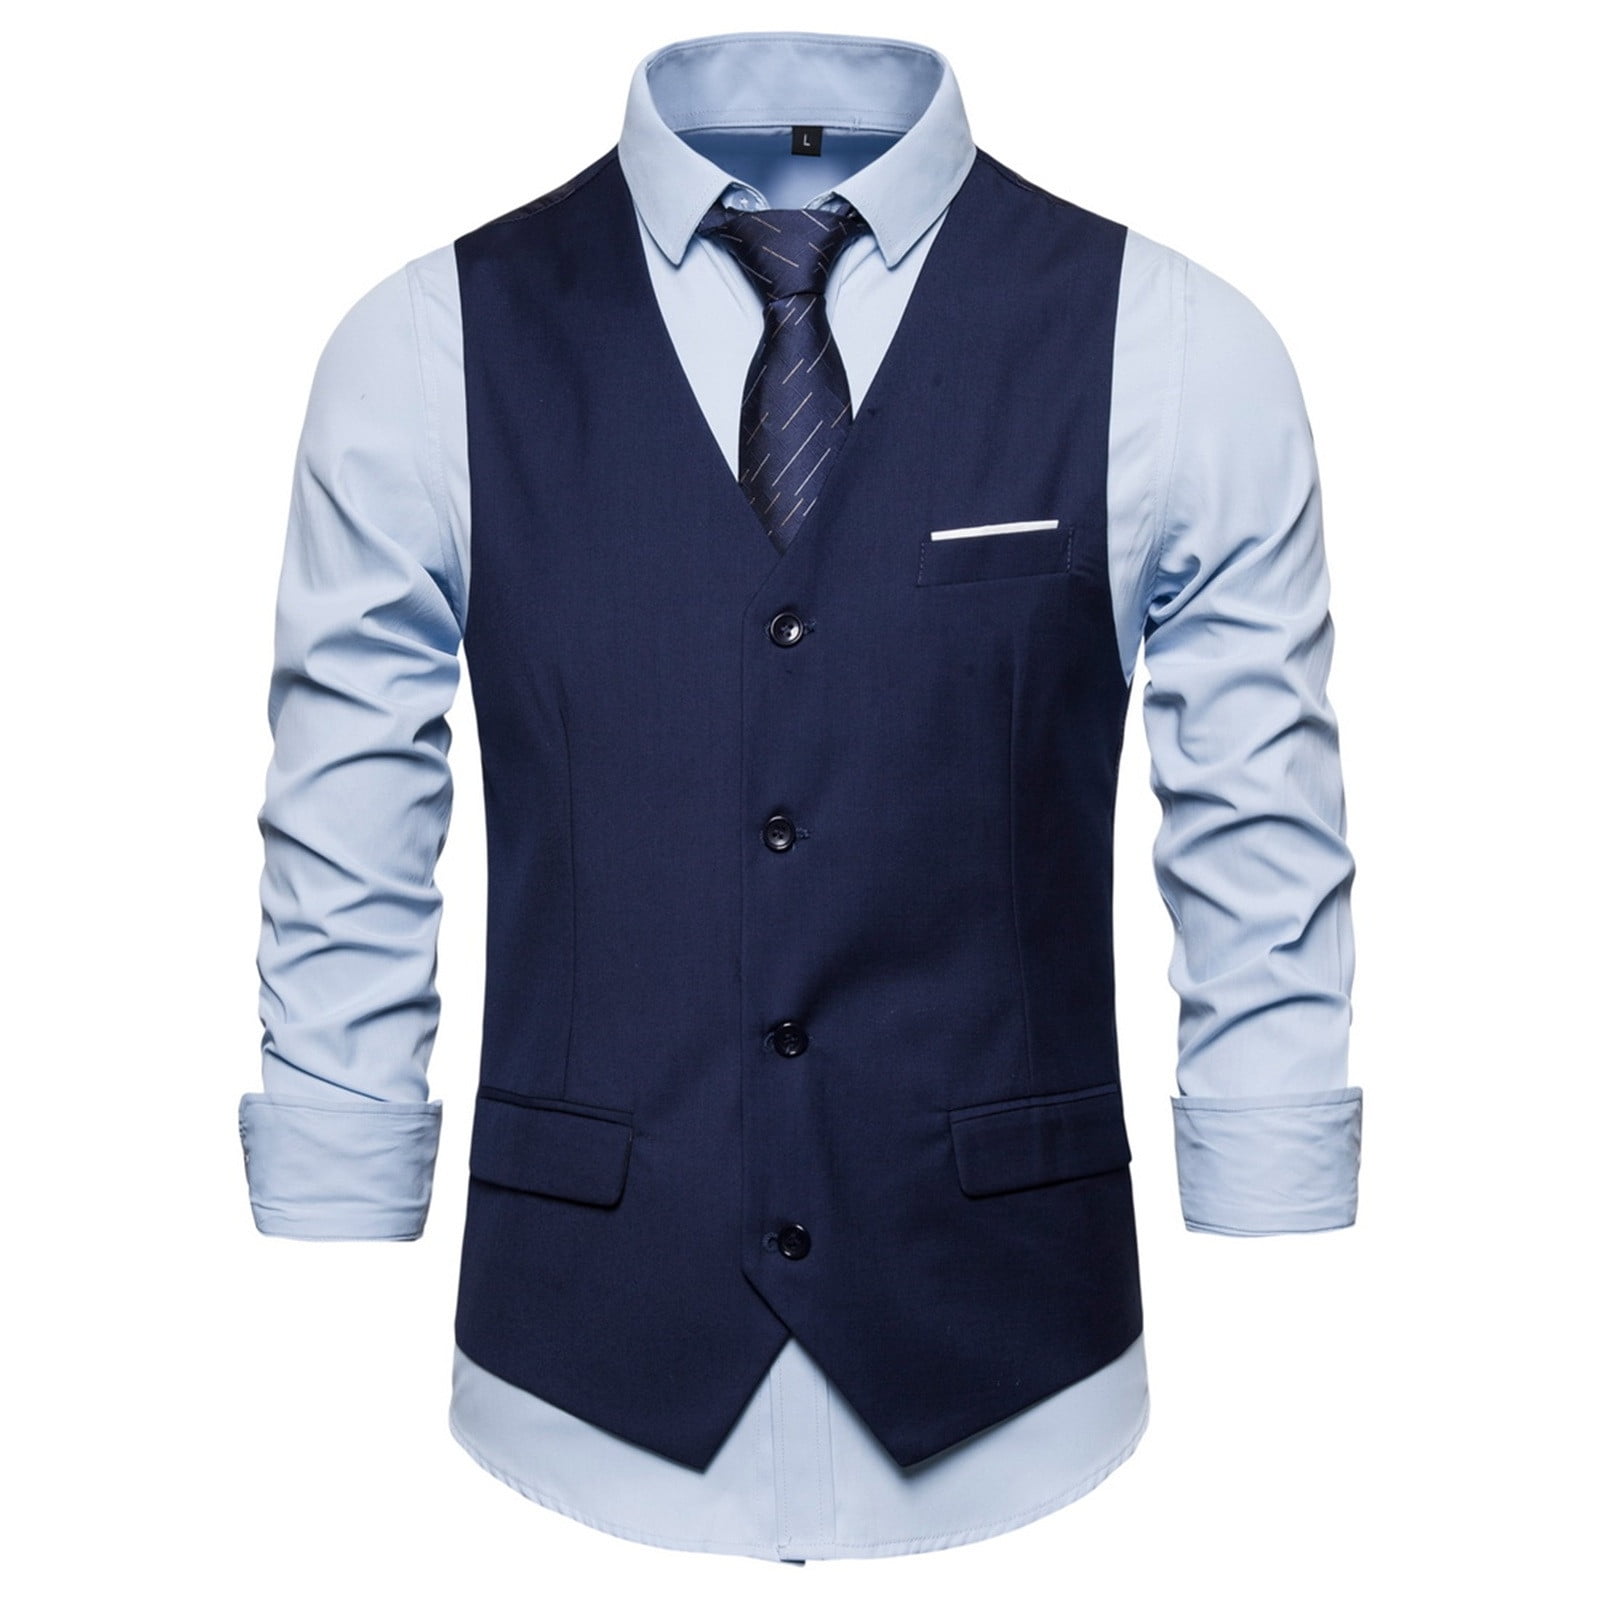 BELLZELY Blazers for Men Big and Tall Clearance Men's Spring Spring Formal  Bussiness Tuxedo Suit Waistcoat Vest Jacket Top Coat